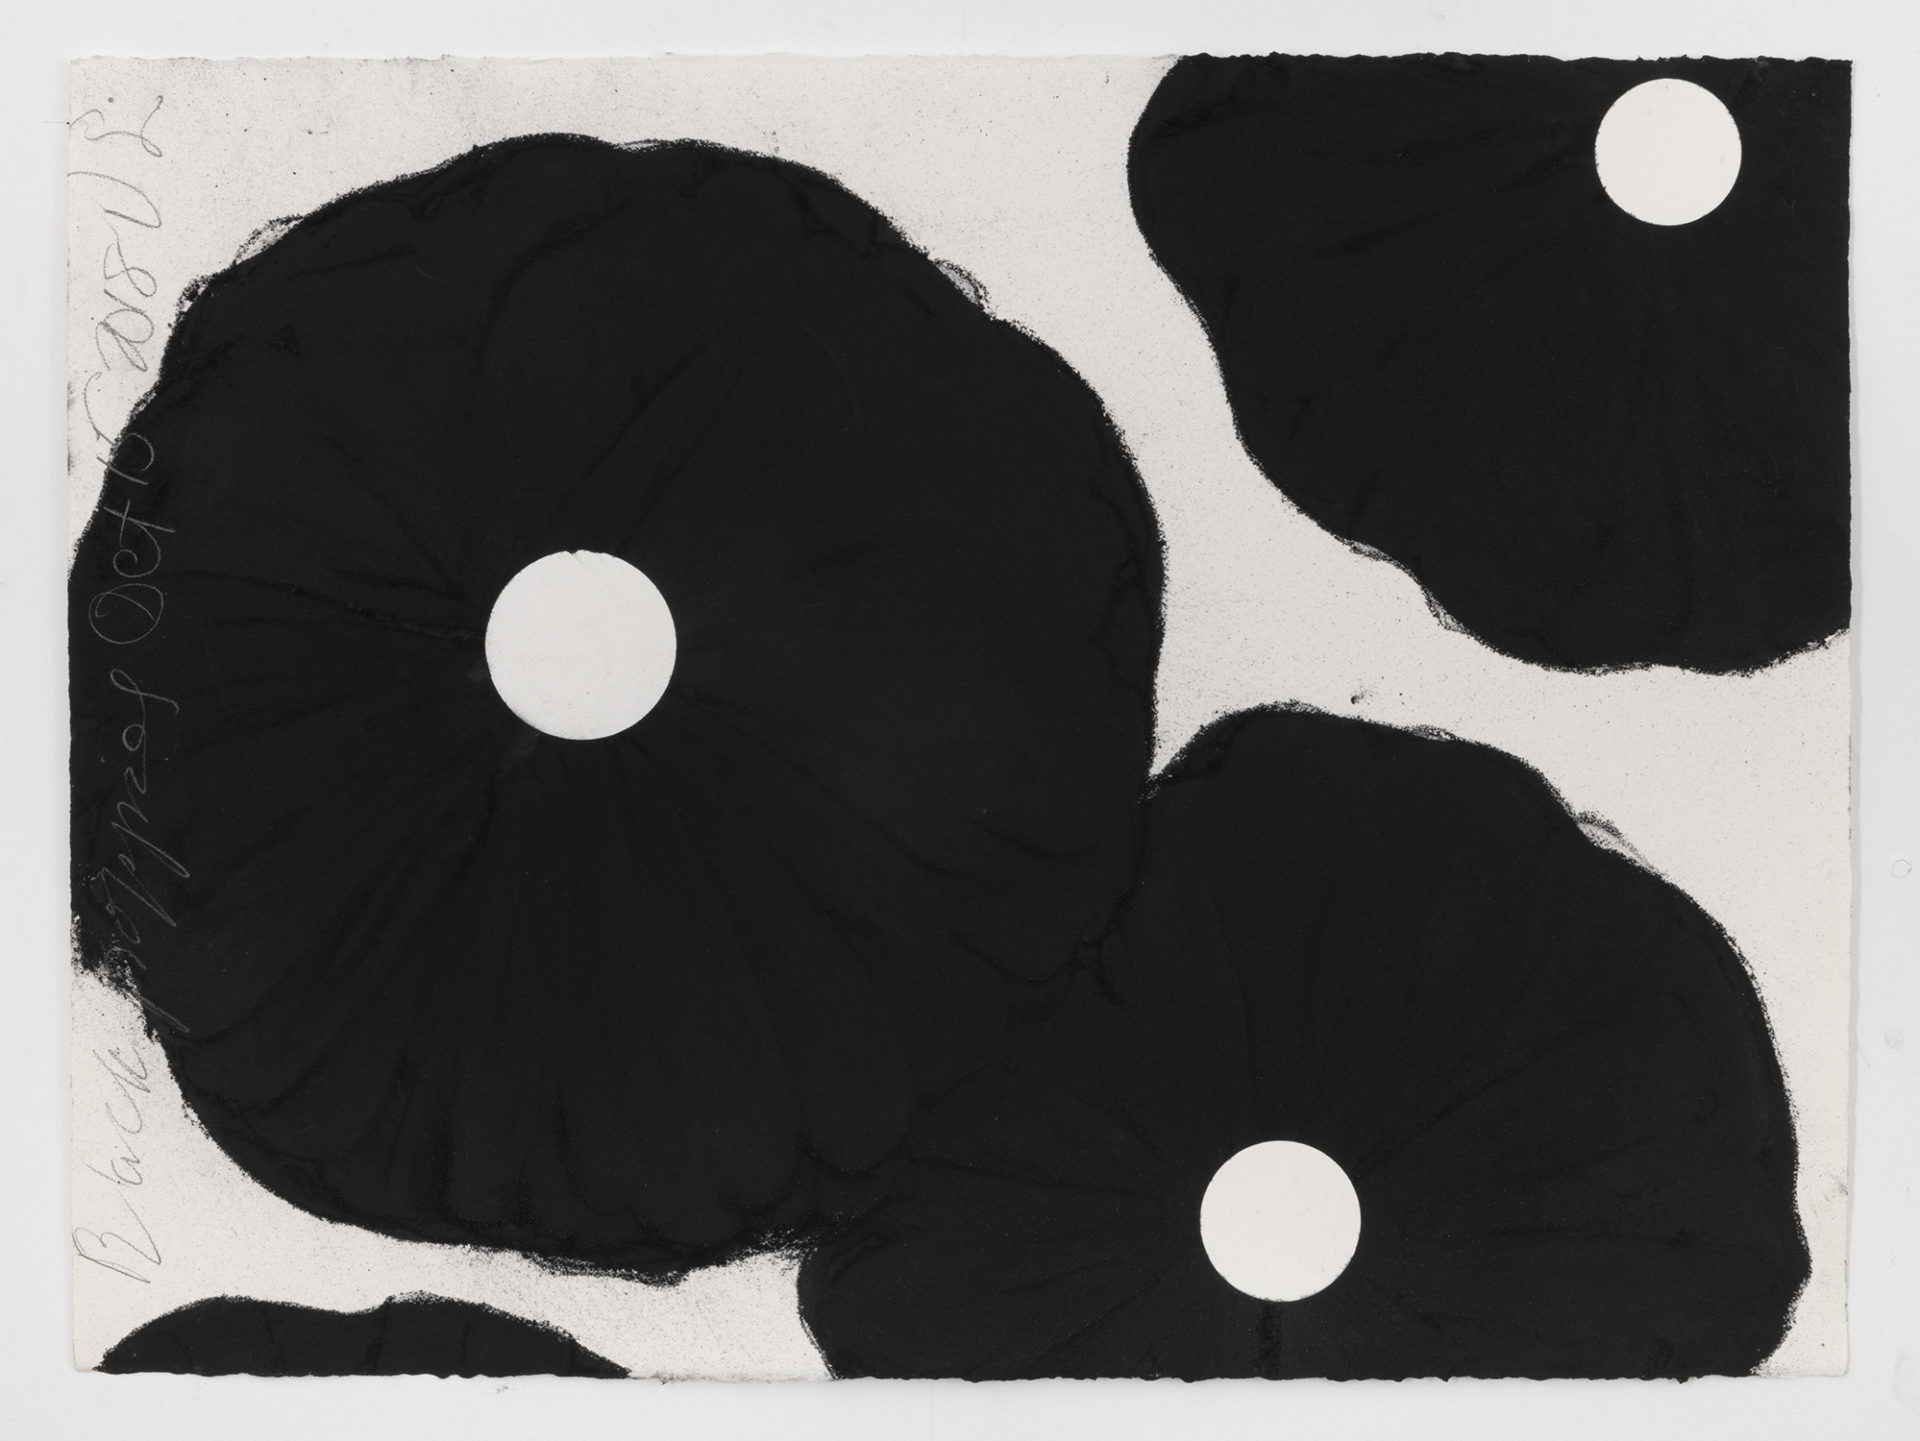 Donald Sultan Black Poppies Oct 15 2018, 2018 Conte crayon on paper 22 1/2 x 30 1/8 inches (57.2 x 76.5 cm)